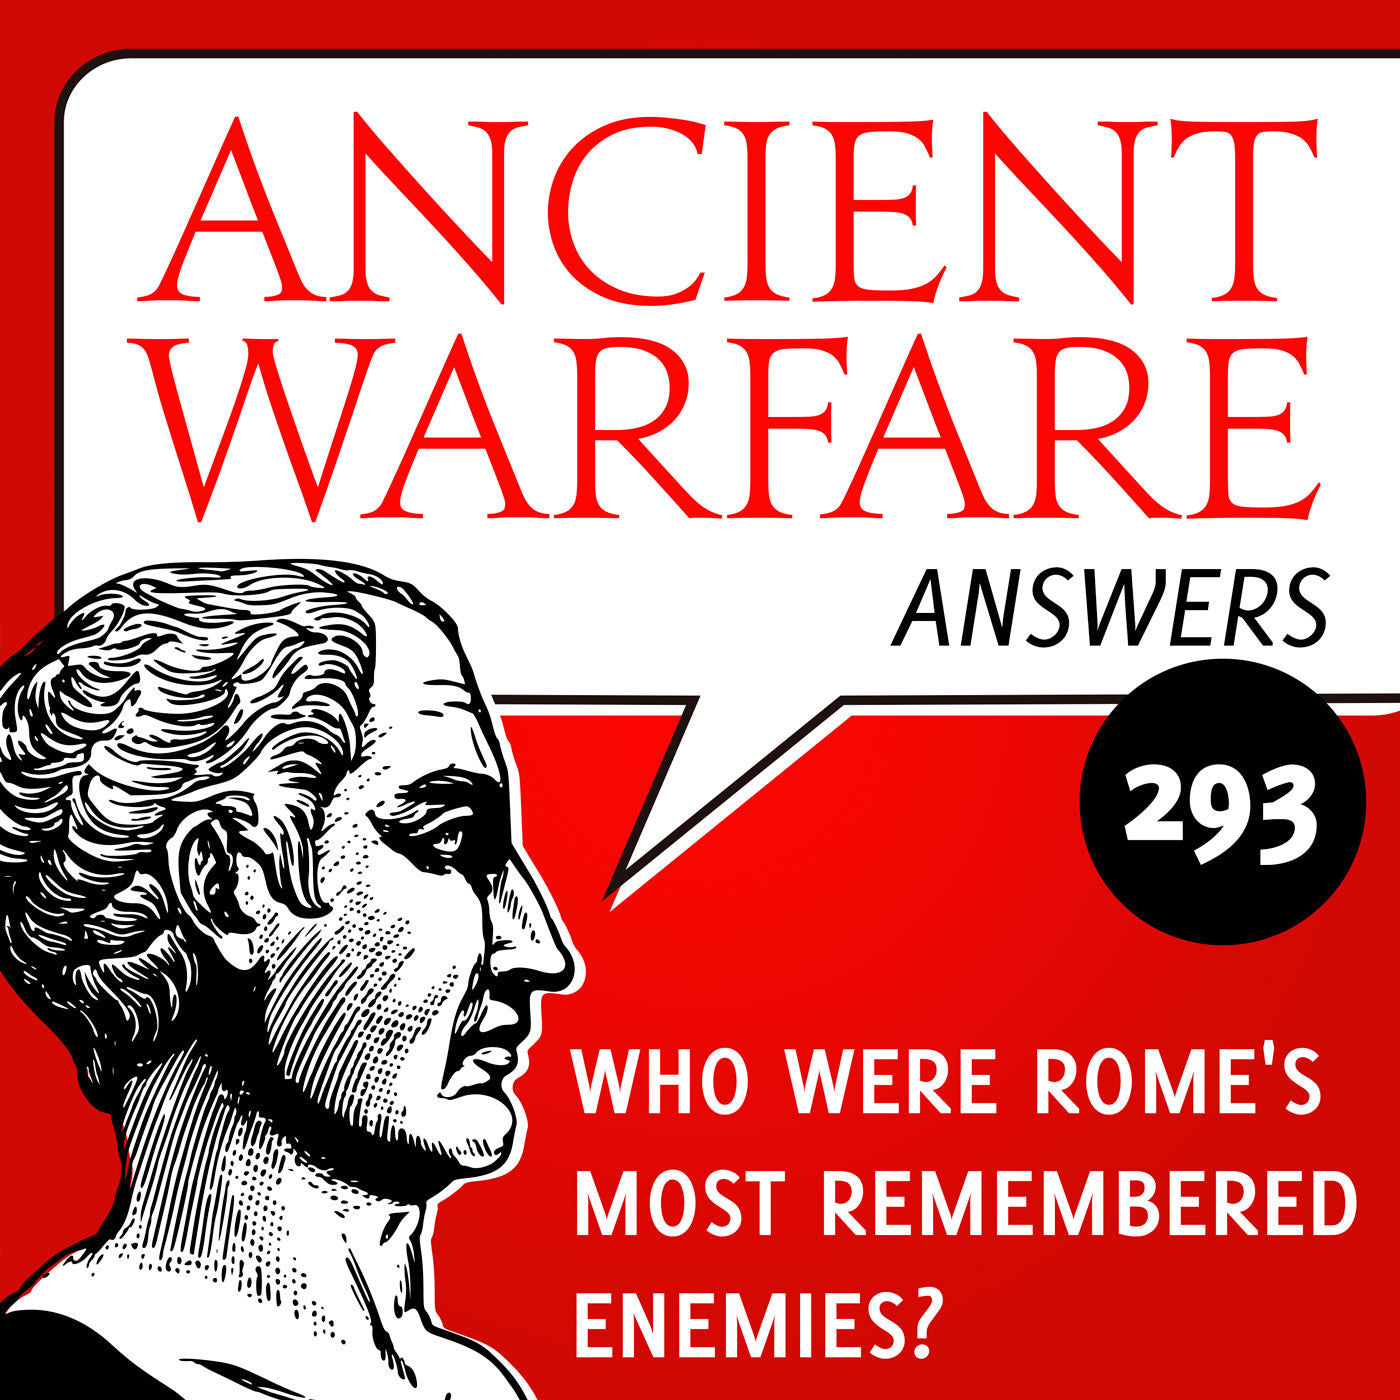 Ancient Warfare Answers (293): Who were Rome's most remembered enemies?